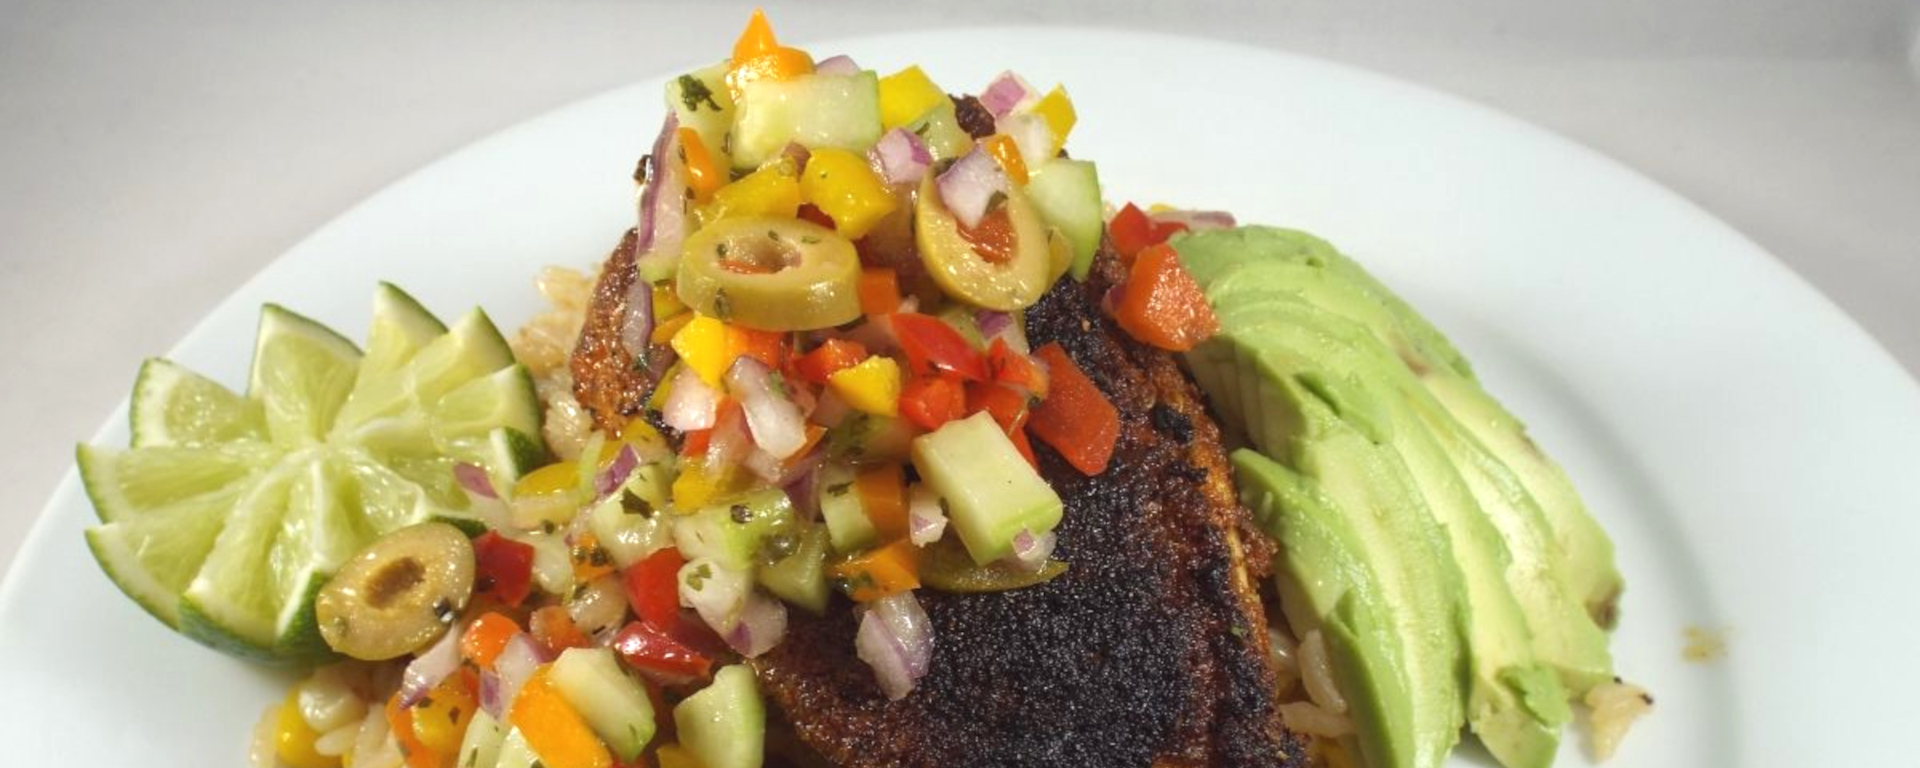 Blackened Tilapia with Cucumber Pico de Gallo and Rice